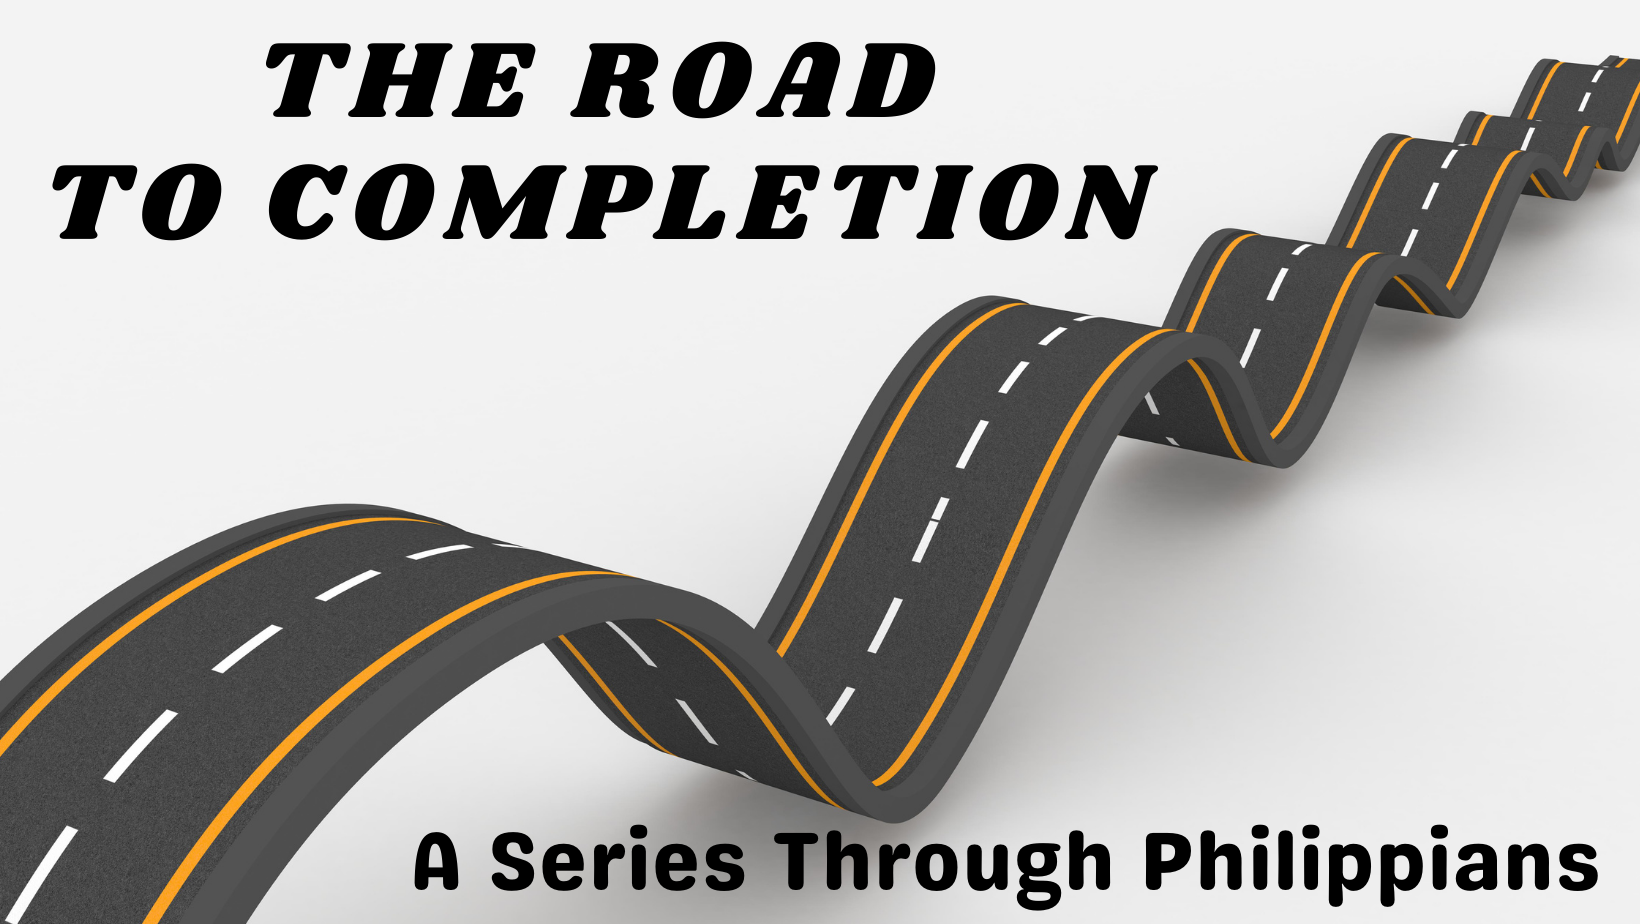 Road to Completion - Who do you put your confidence in?